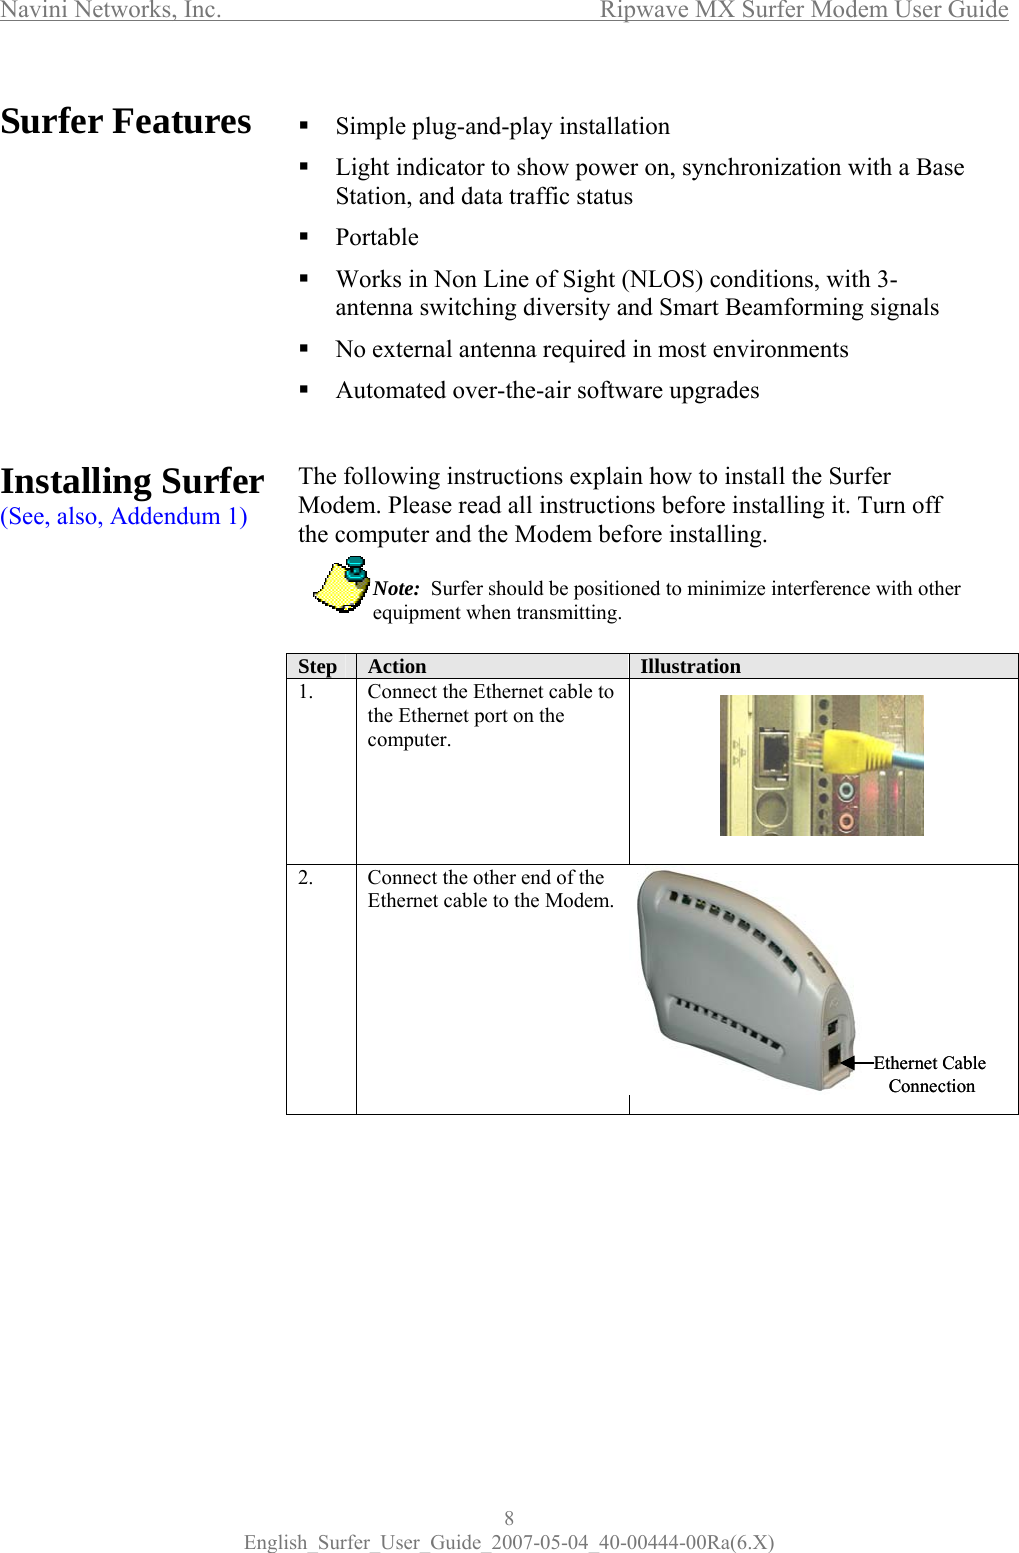 Navini Networks, Inc.      Ripwave MX Surfer Modem User Guide 8 English_Surfer_User_Guide_2007-05-04_40-00444-00Ra(6.X) Surfer Features            Installing Surfer (See, also, Addendum 1)             Simple plug-and-play installation  Light indicator to show power on, synchronization with a Base Station, and data traffic status  Portable  Works in Non Line of Sight (NLOS) conditions, with 3-antenna switching diversity and Smart Beamforming signals   No external antenna required in most environments  Automated over-the-air software upgrades   The following instructions explain how to install the Surfer Modem. Please read all instructions before installing it. Turn off the computer and the Modem before installing.             Note:  Surfer should be positioned to minimize interference with other   equipment when transmitting.  Step  Action  Illustration  1.  Connect the Ethernet cable to the Ethernet port on the computer.  2.  Connect the other end of the Ethernet cable to the Modem.         Ethernet Cable ConnectionEthernet Cable Connection